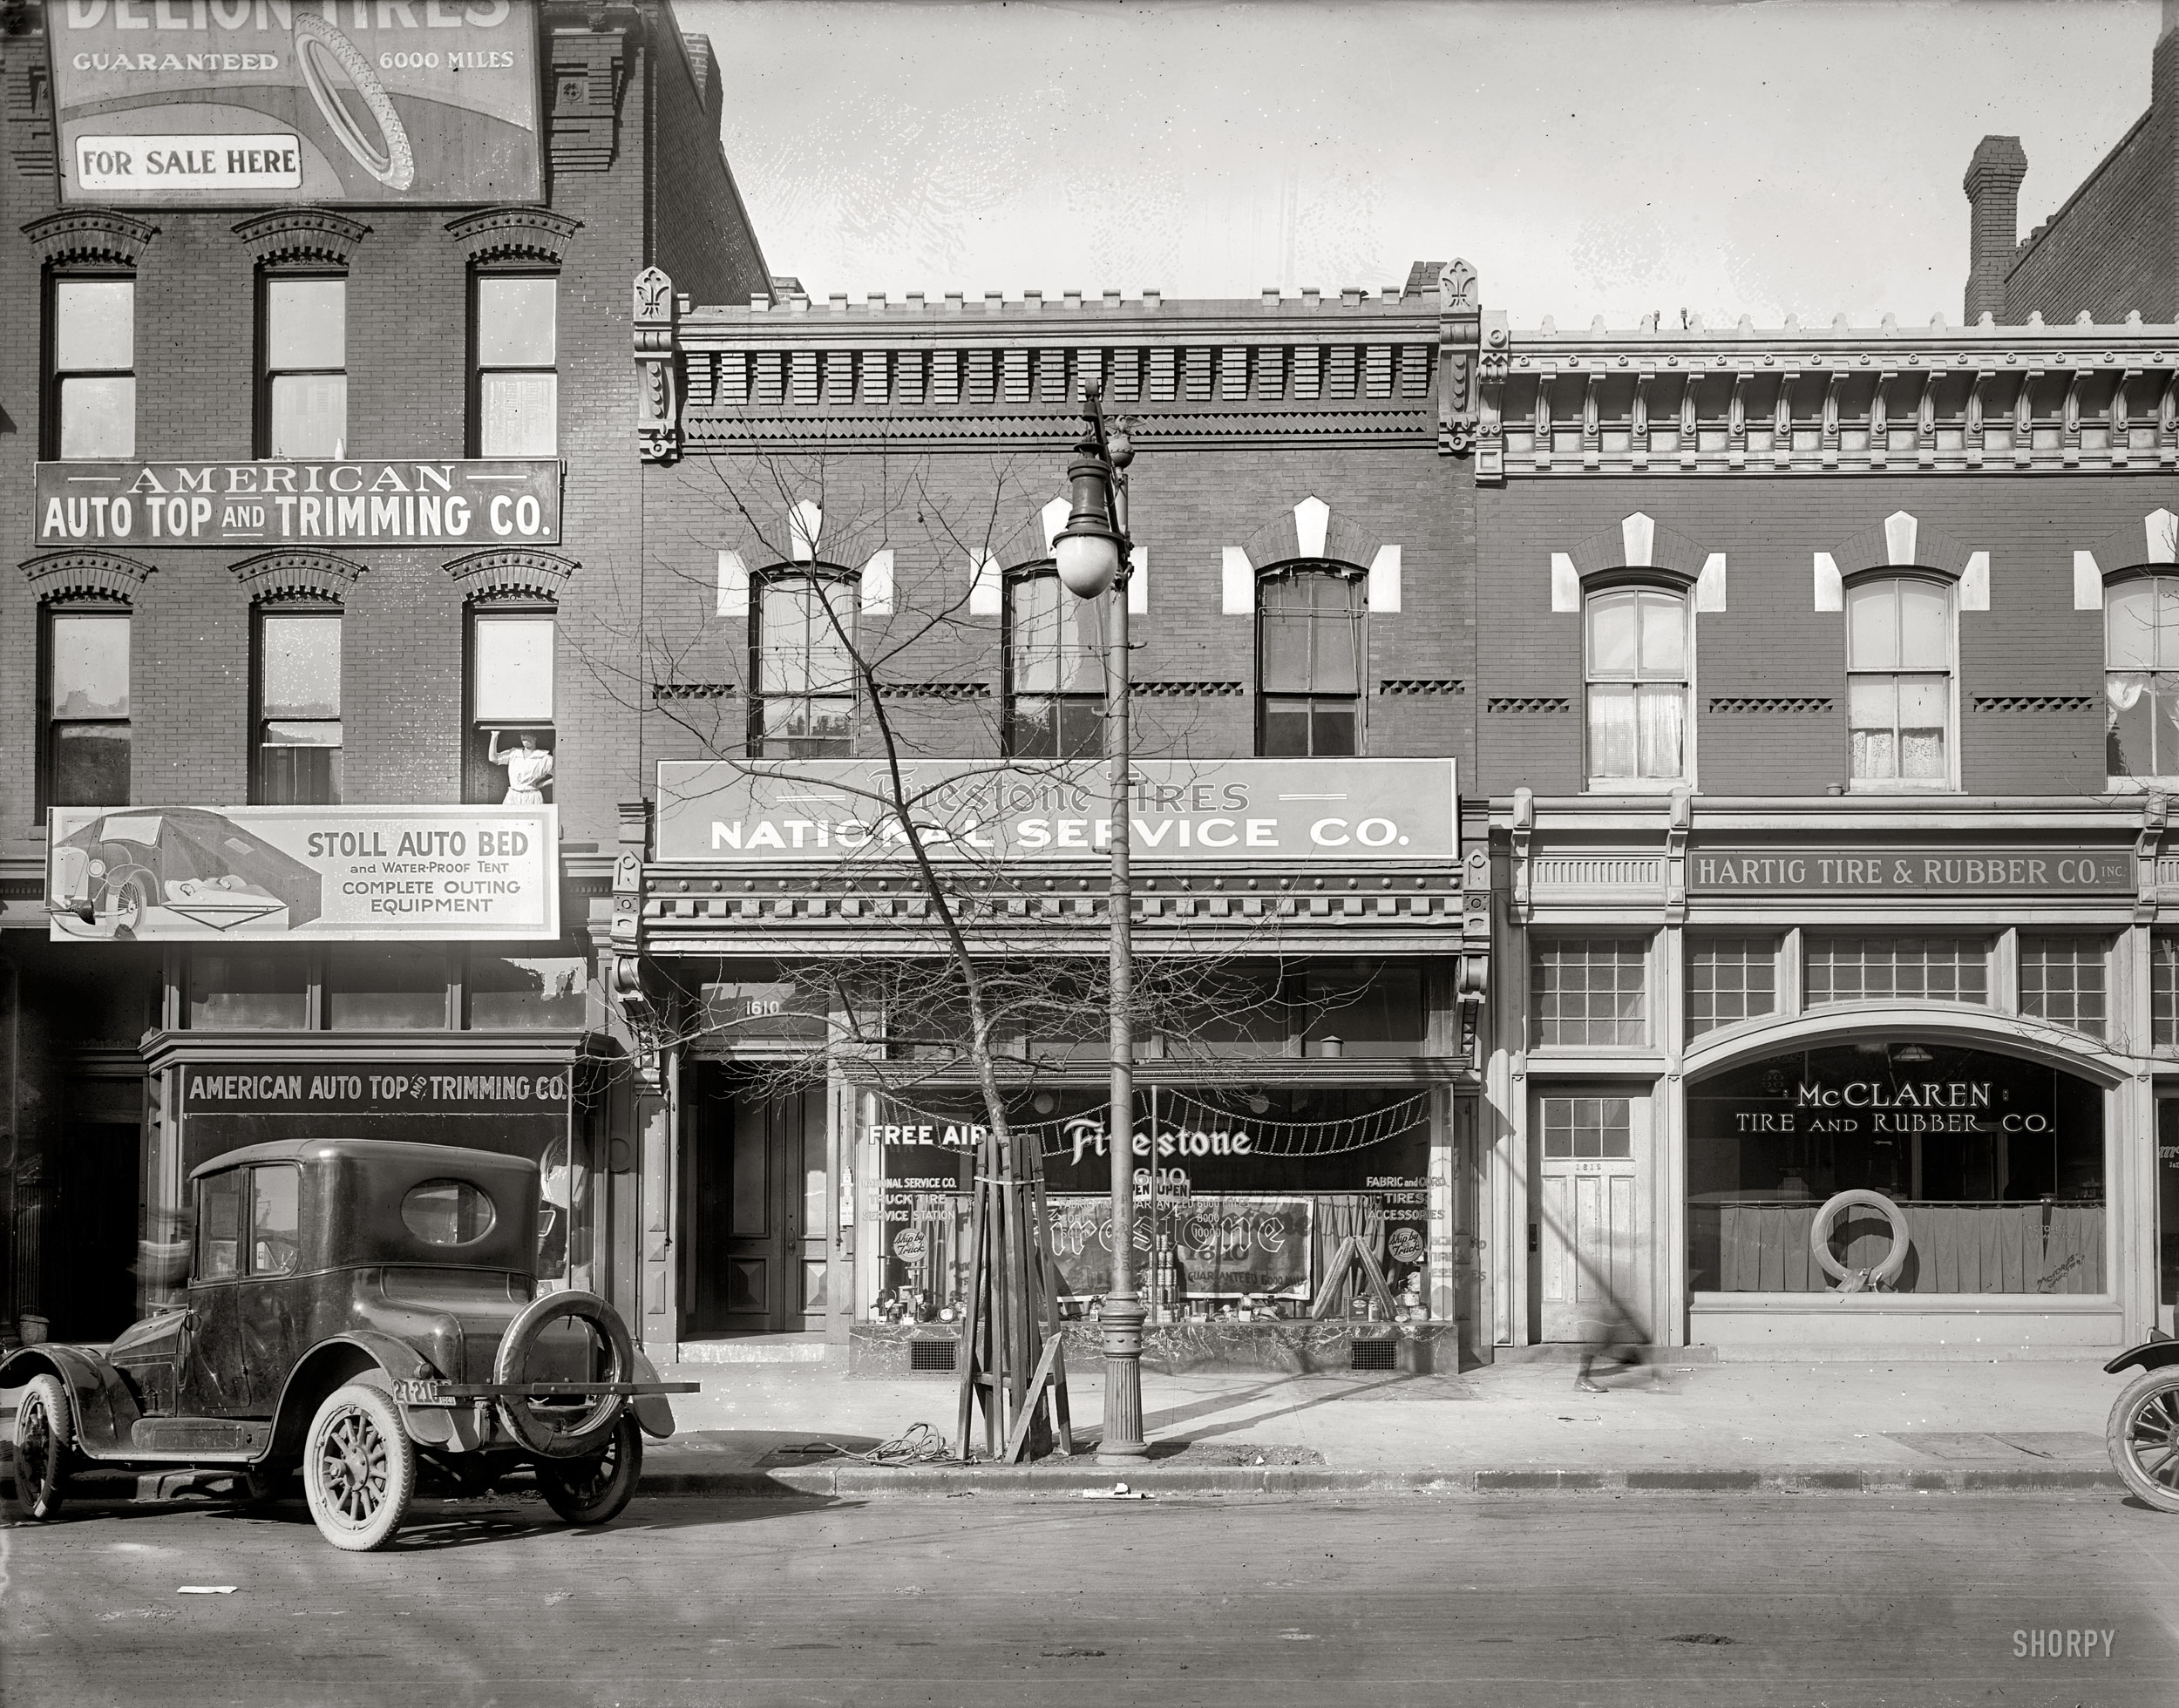 Washington, D.C., circa 1920. "National Service Co. front, 1610 14th Street N.W." Home of 24-hour tire service. National Photo Co. glass negative. View full size.